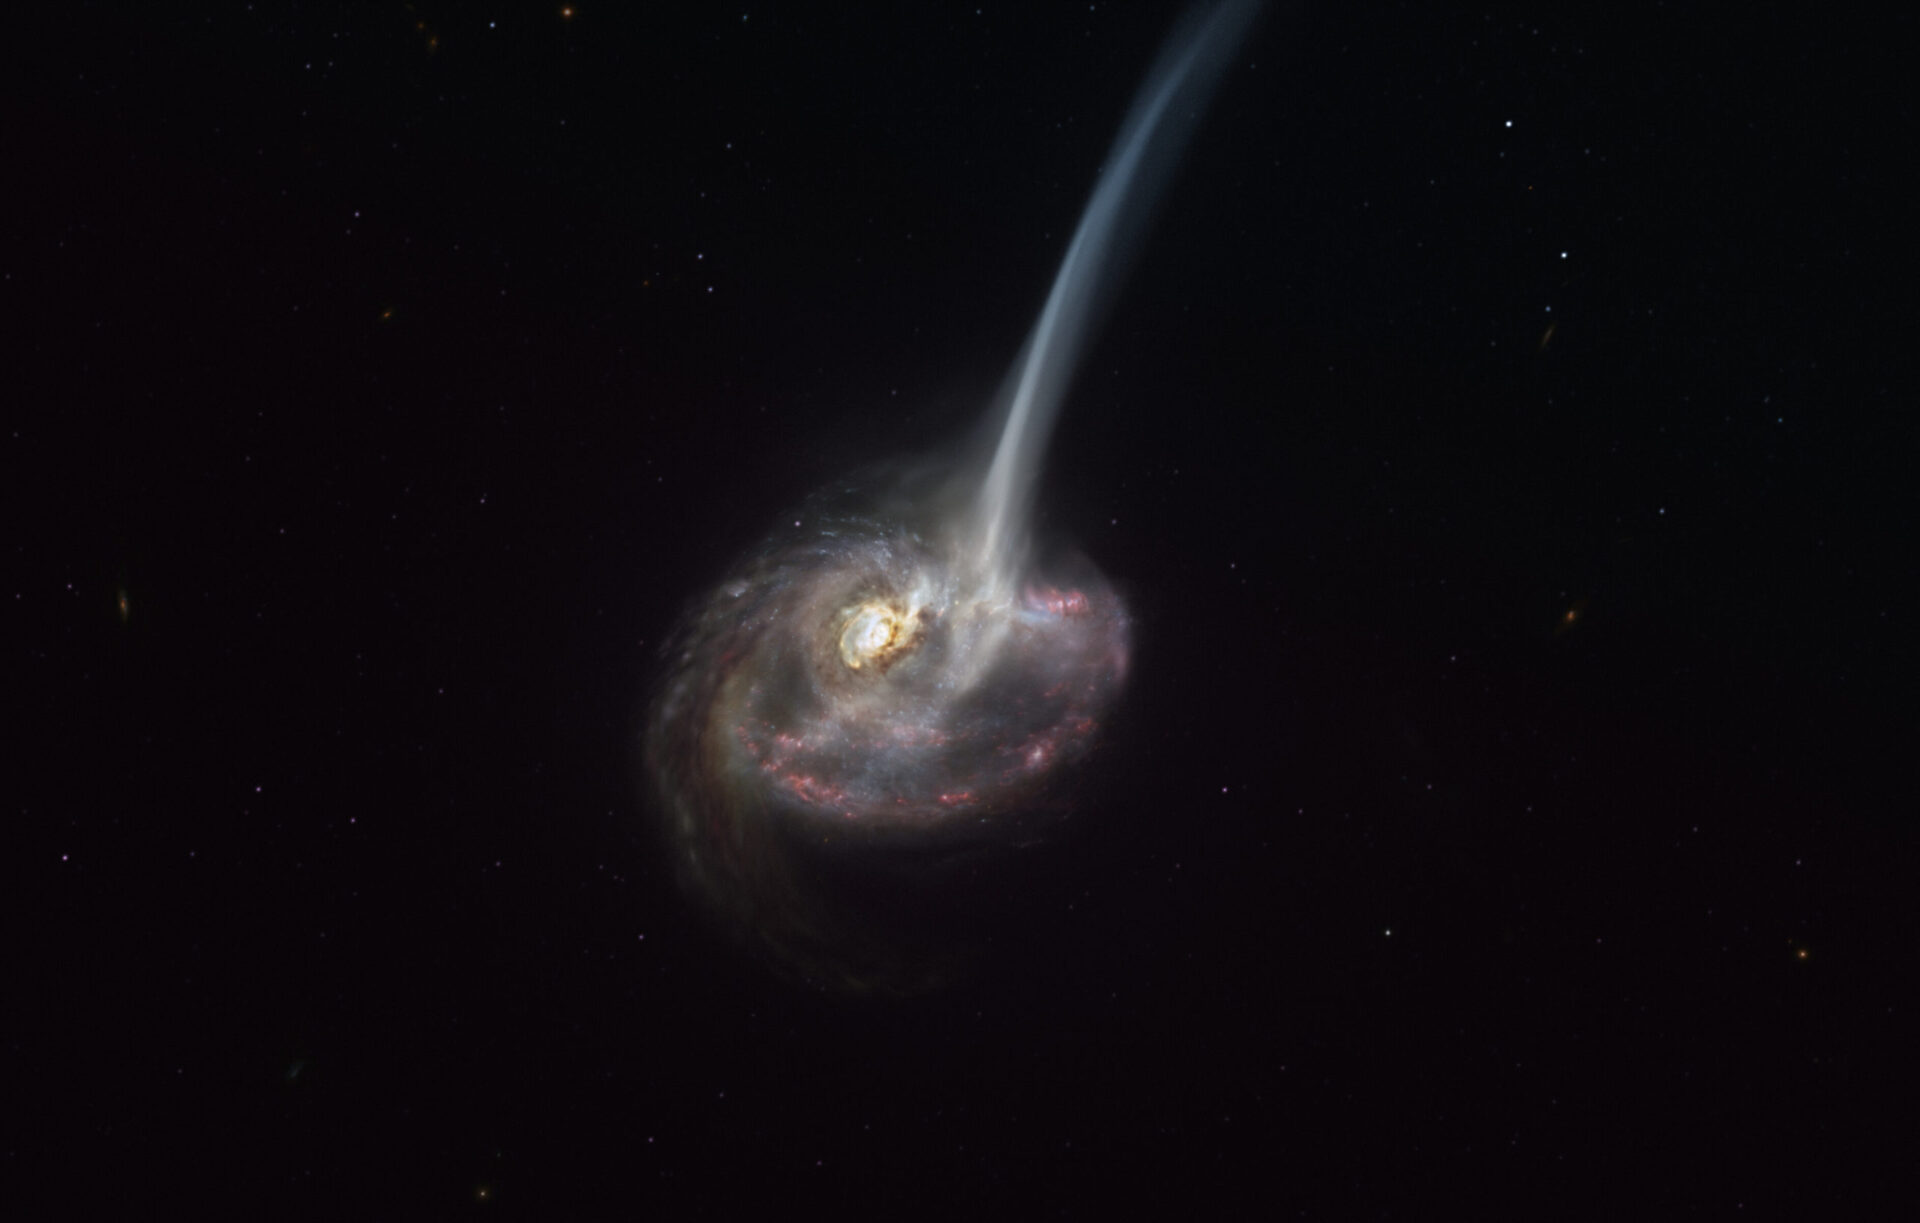 This artist’s impression of ID2299 shows the galaxy, the product of a galactic collision, and some of its gas being ejected by a “tidal tail” as a result of the merger. New observations made with ALMA, in which ESO is a partner, have captured the earliest stages of this ejection, before the gas reached the very large scales depicted in this artist’s impression. Credit: ESO/M. Kornmesser